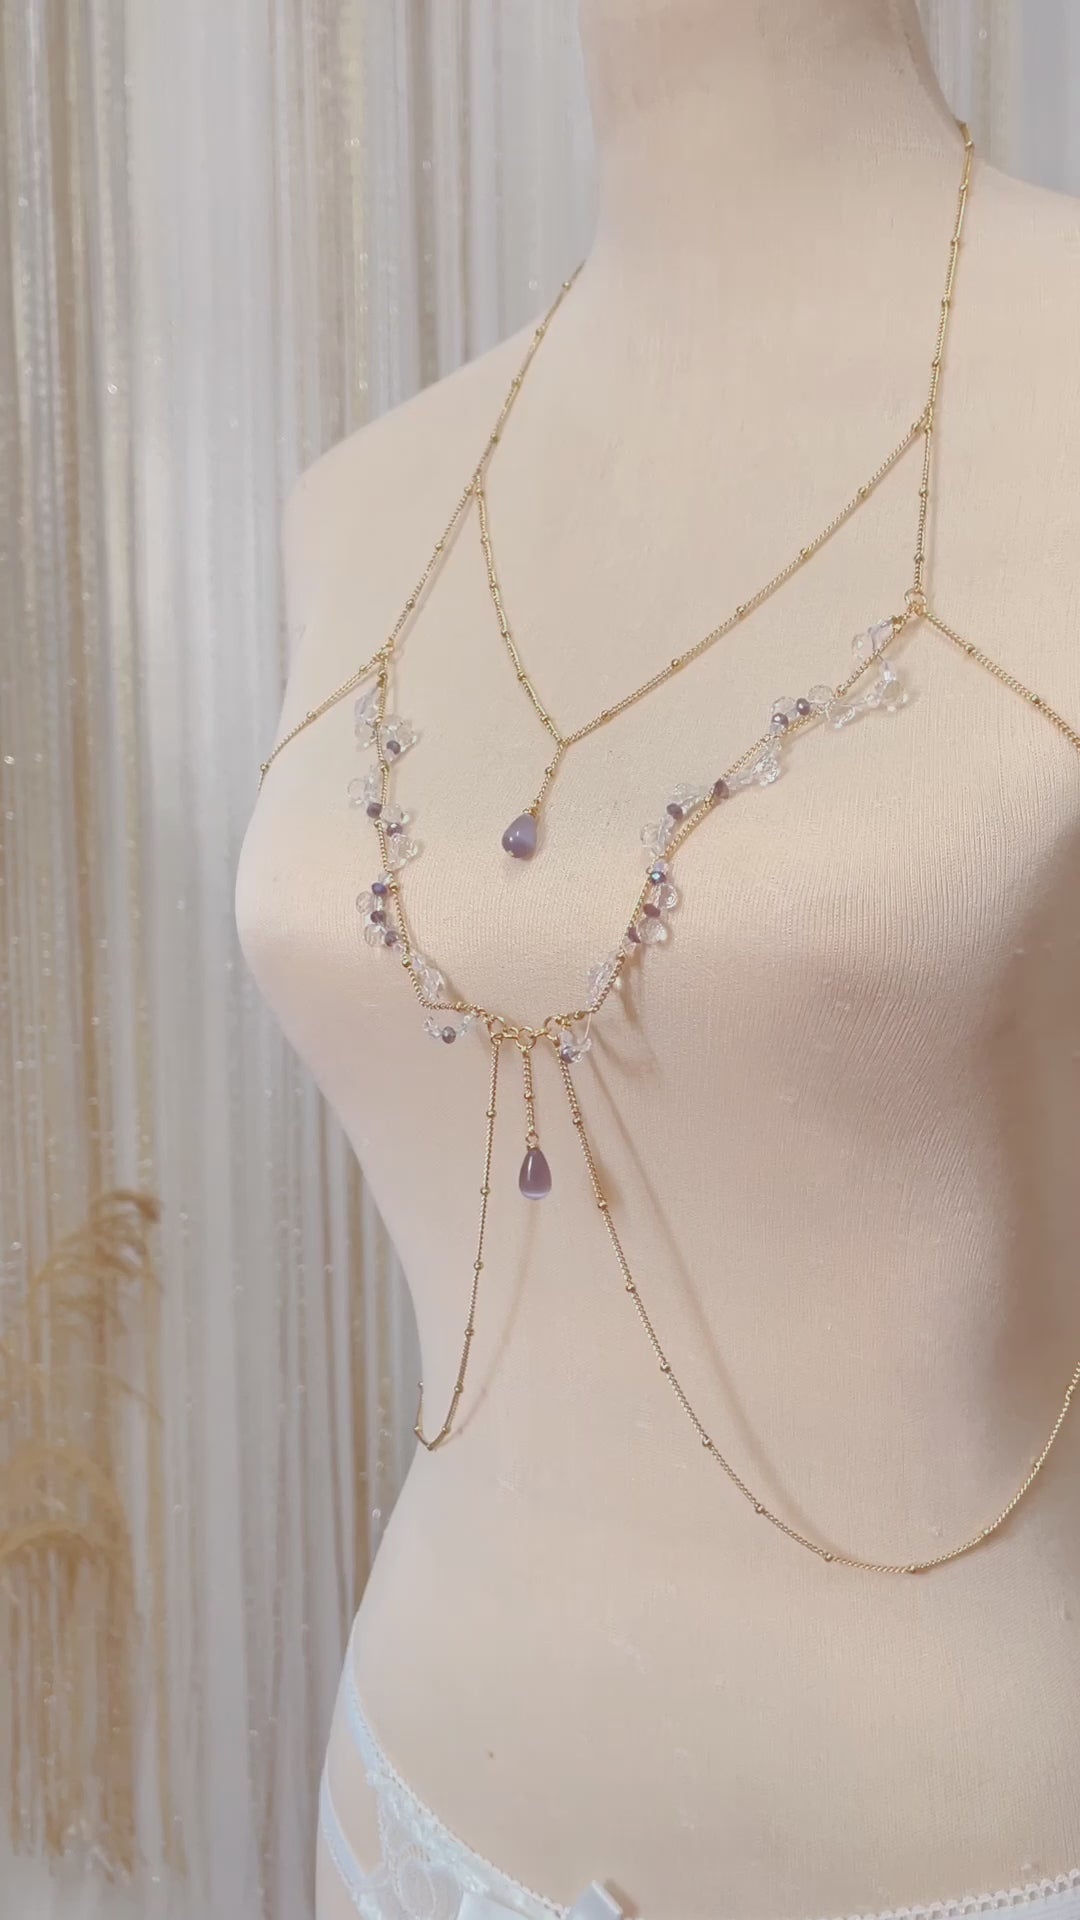 The dreamy 'Lila' double layer body chain by Stoneriver Philippines. Adorned with lilac cat eye stones, swarovski, and glass crystals on 18k goldfilled chains.